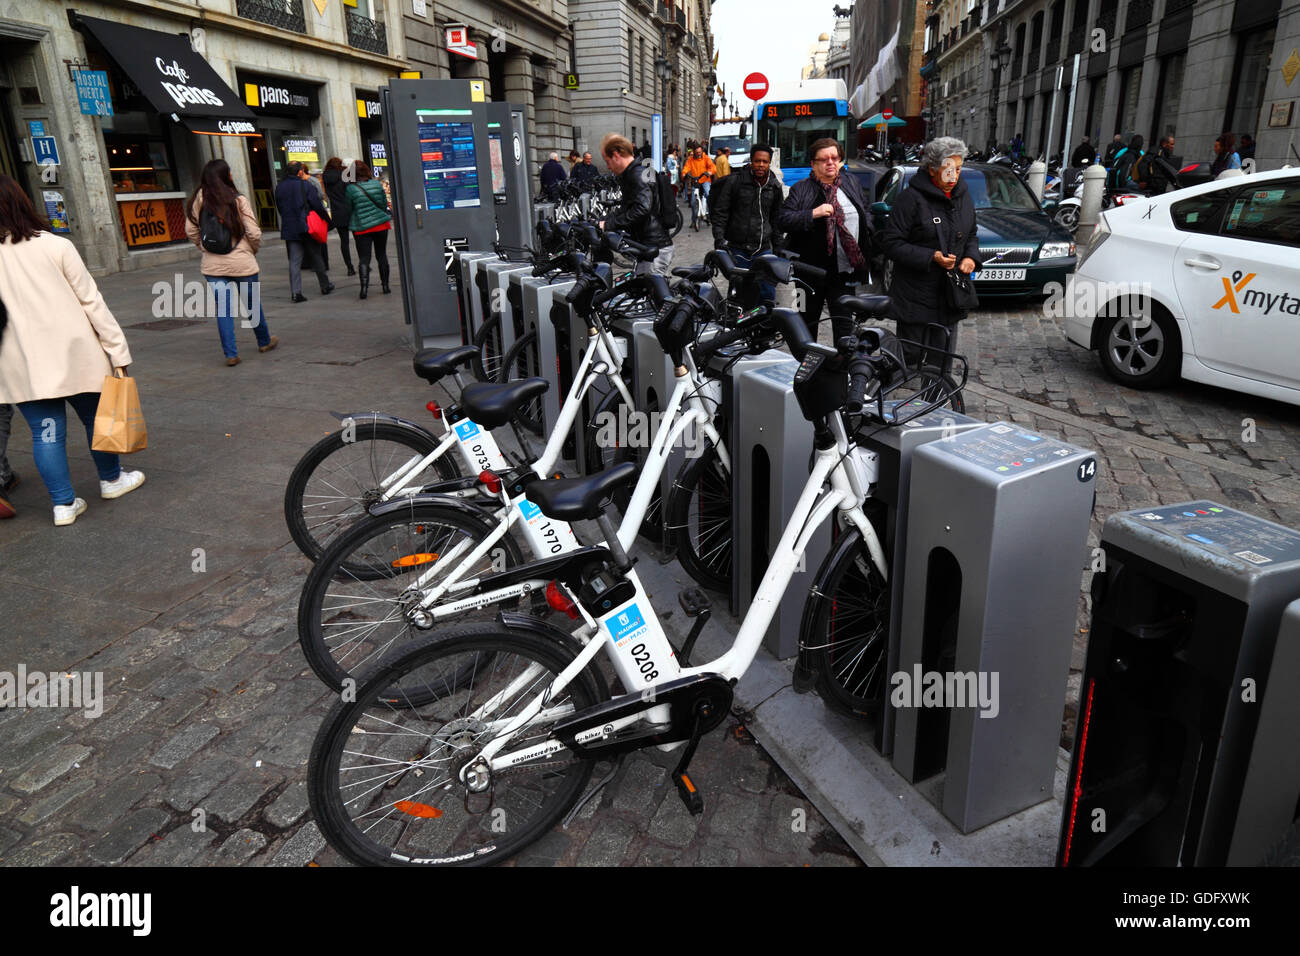 BiciMAD electric bicycles for public rental at a docking station on Plaza Puerta del Sol, Madrid, Spain Stock Photo